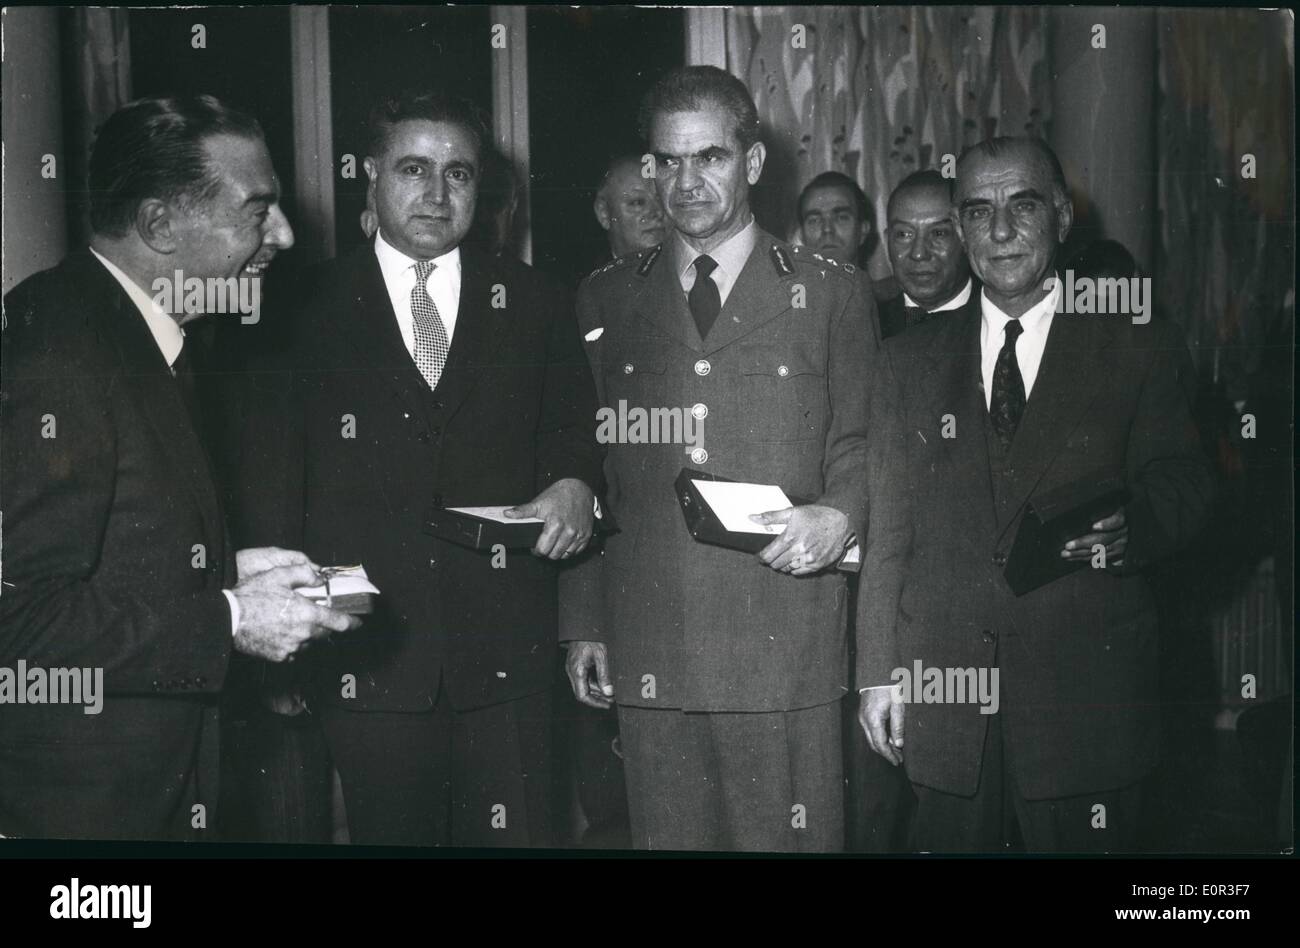 Nov. 11, 1957 - Dignitaries Receive Medals from Italian President the Italian consul general in Istanbul, Mr. Carlo Comile betewed today medals t high ranking officials of the city and university of Istanbul on behalf of President Gievanni Grench who recently paid on officials visit to Turkey.Istanbul. Stock Photo